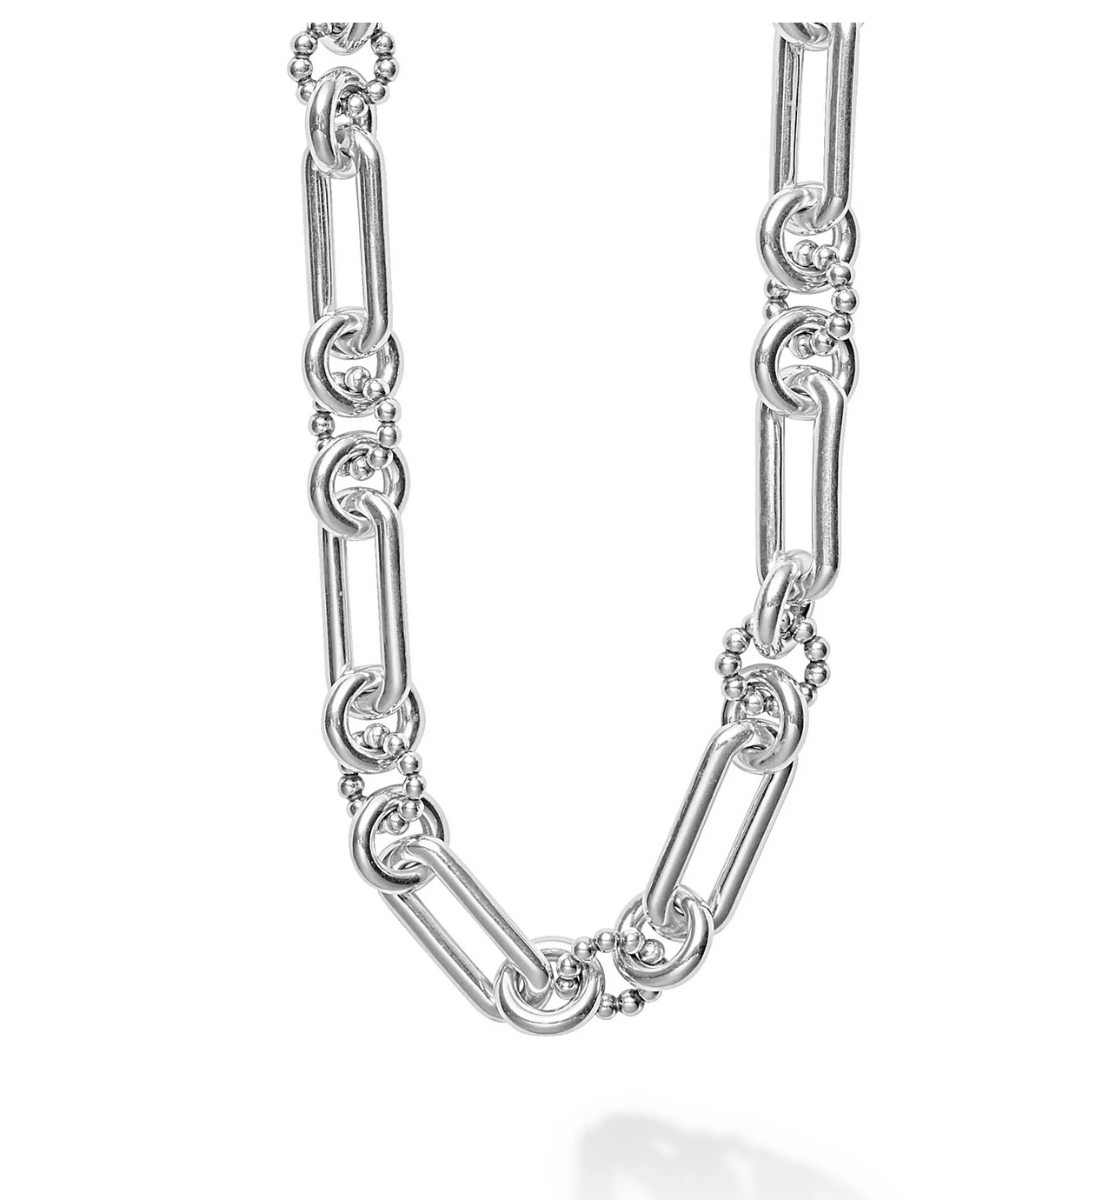 LAGOS  Signature Caviar
Sterling Silver Link Necklace